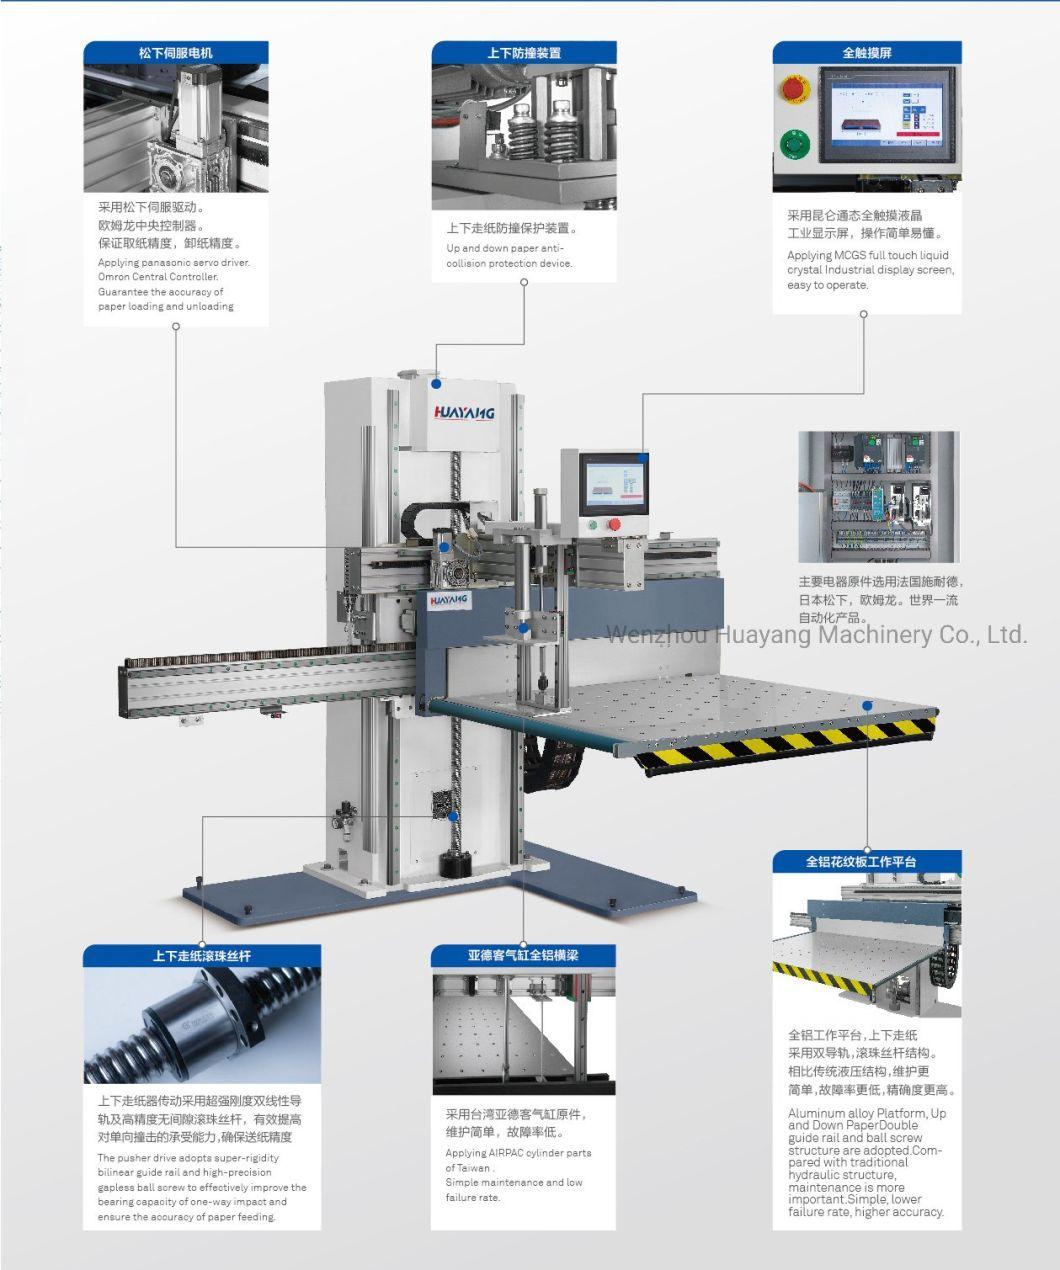 (Stack Loading Machine for Paper Cutter) Automatic Fetcher Machine for Paper Cutter Hyq-1370